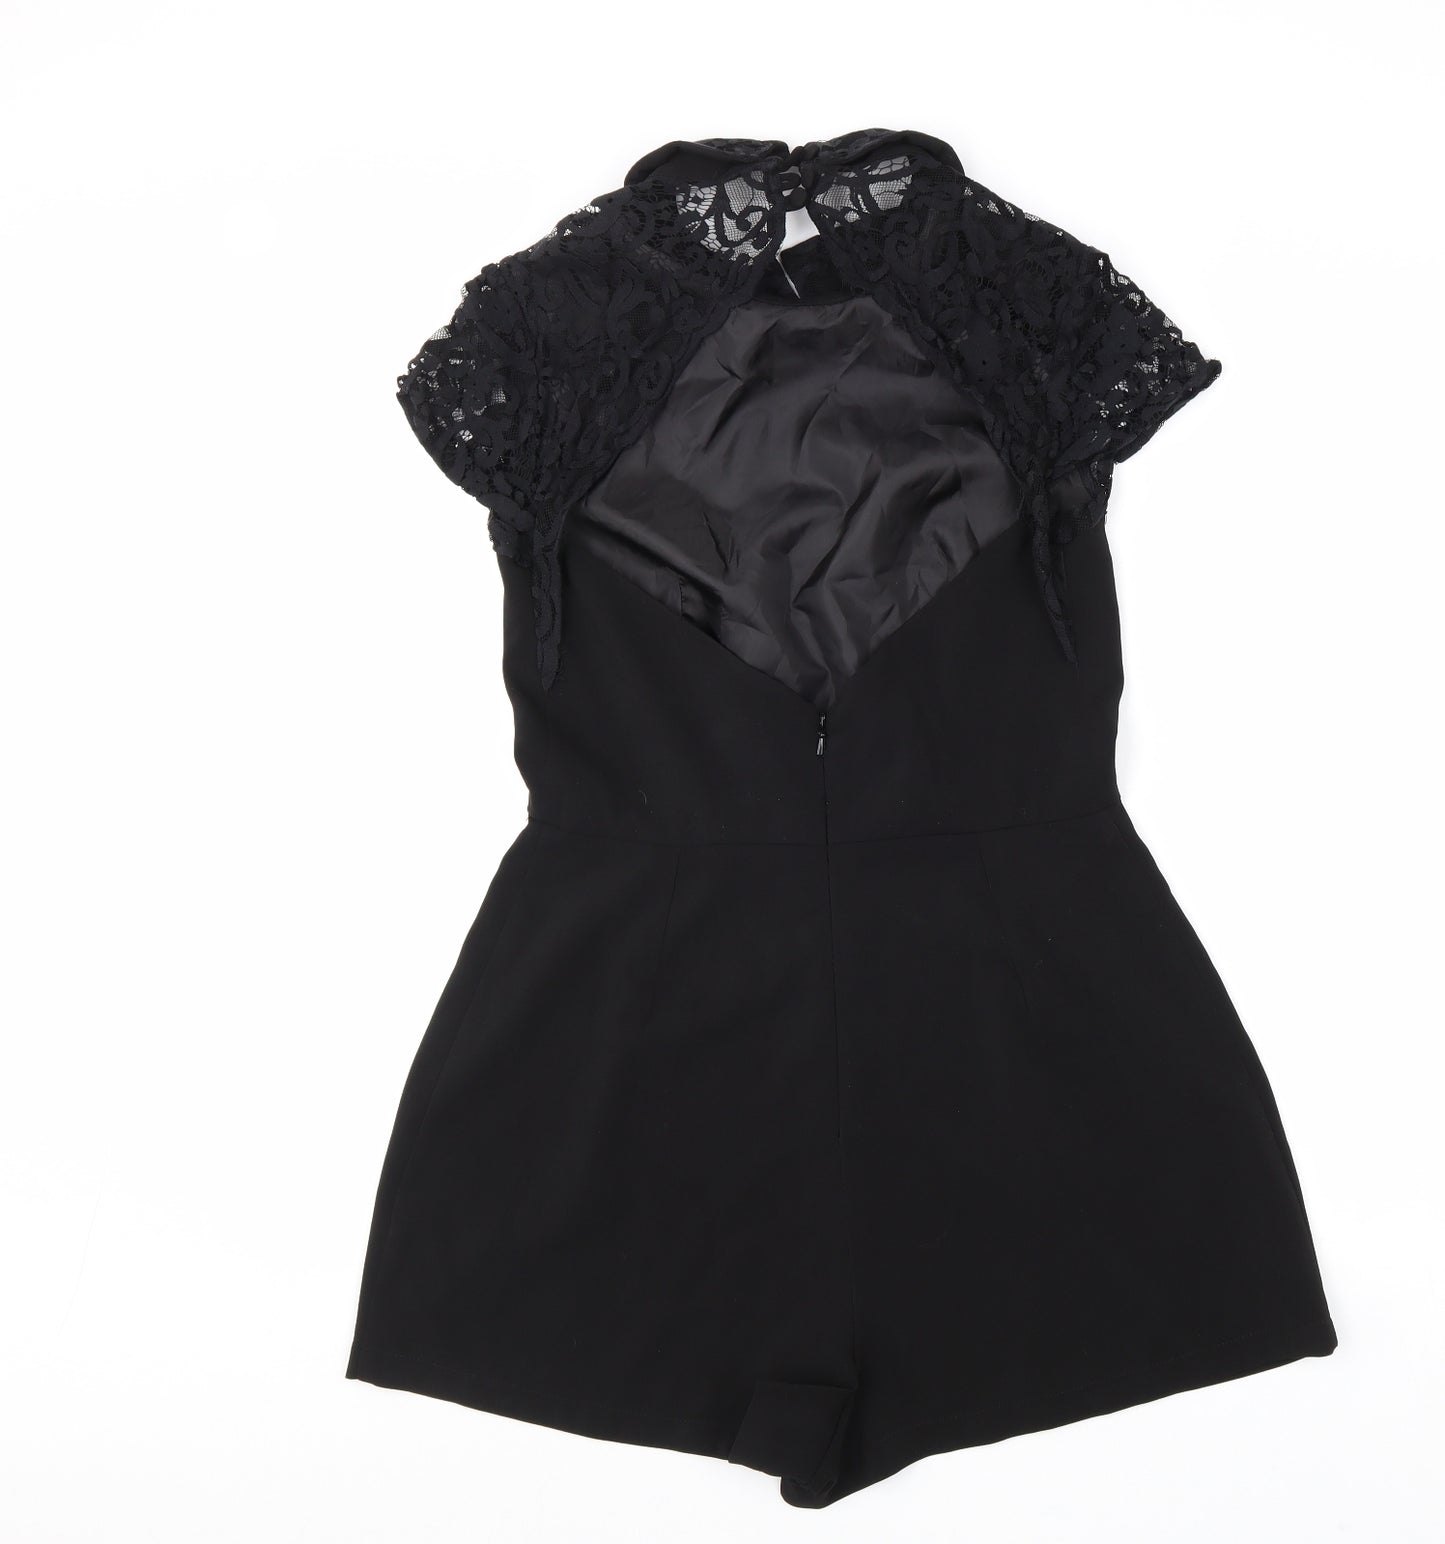 Topshop Womens Black Polyester Playsuit One-Piece Size 12 Button - Lace Detail, Cut Out Back